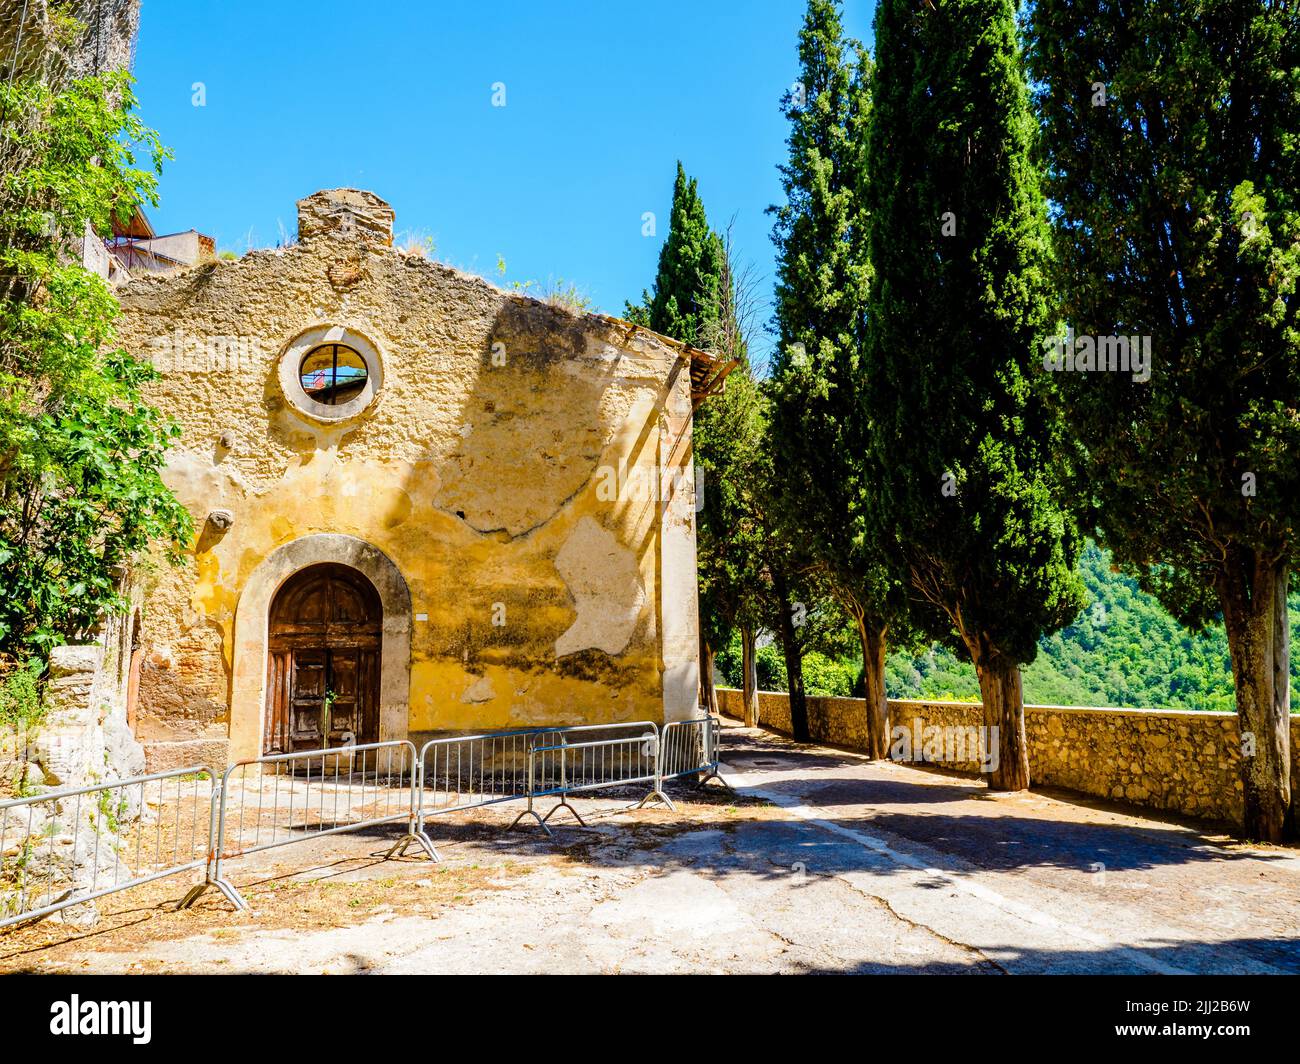 Abandoned church in the medieval town of Rocca Sinibalda - Rieti, Italy Stock Photo